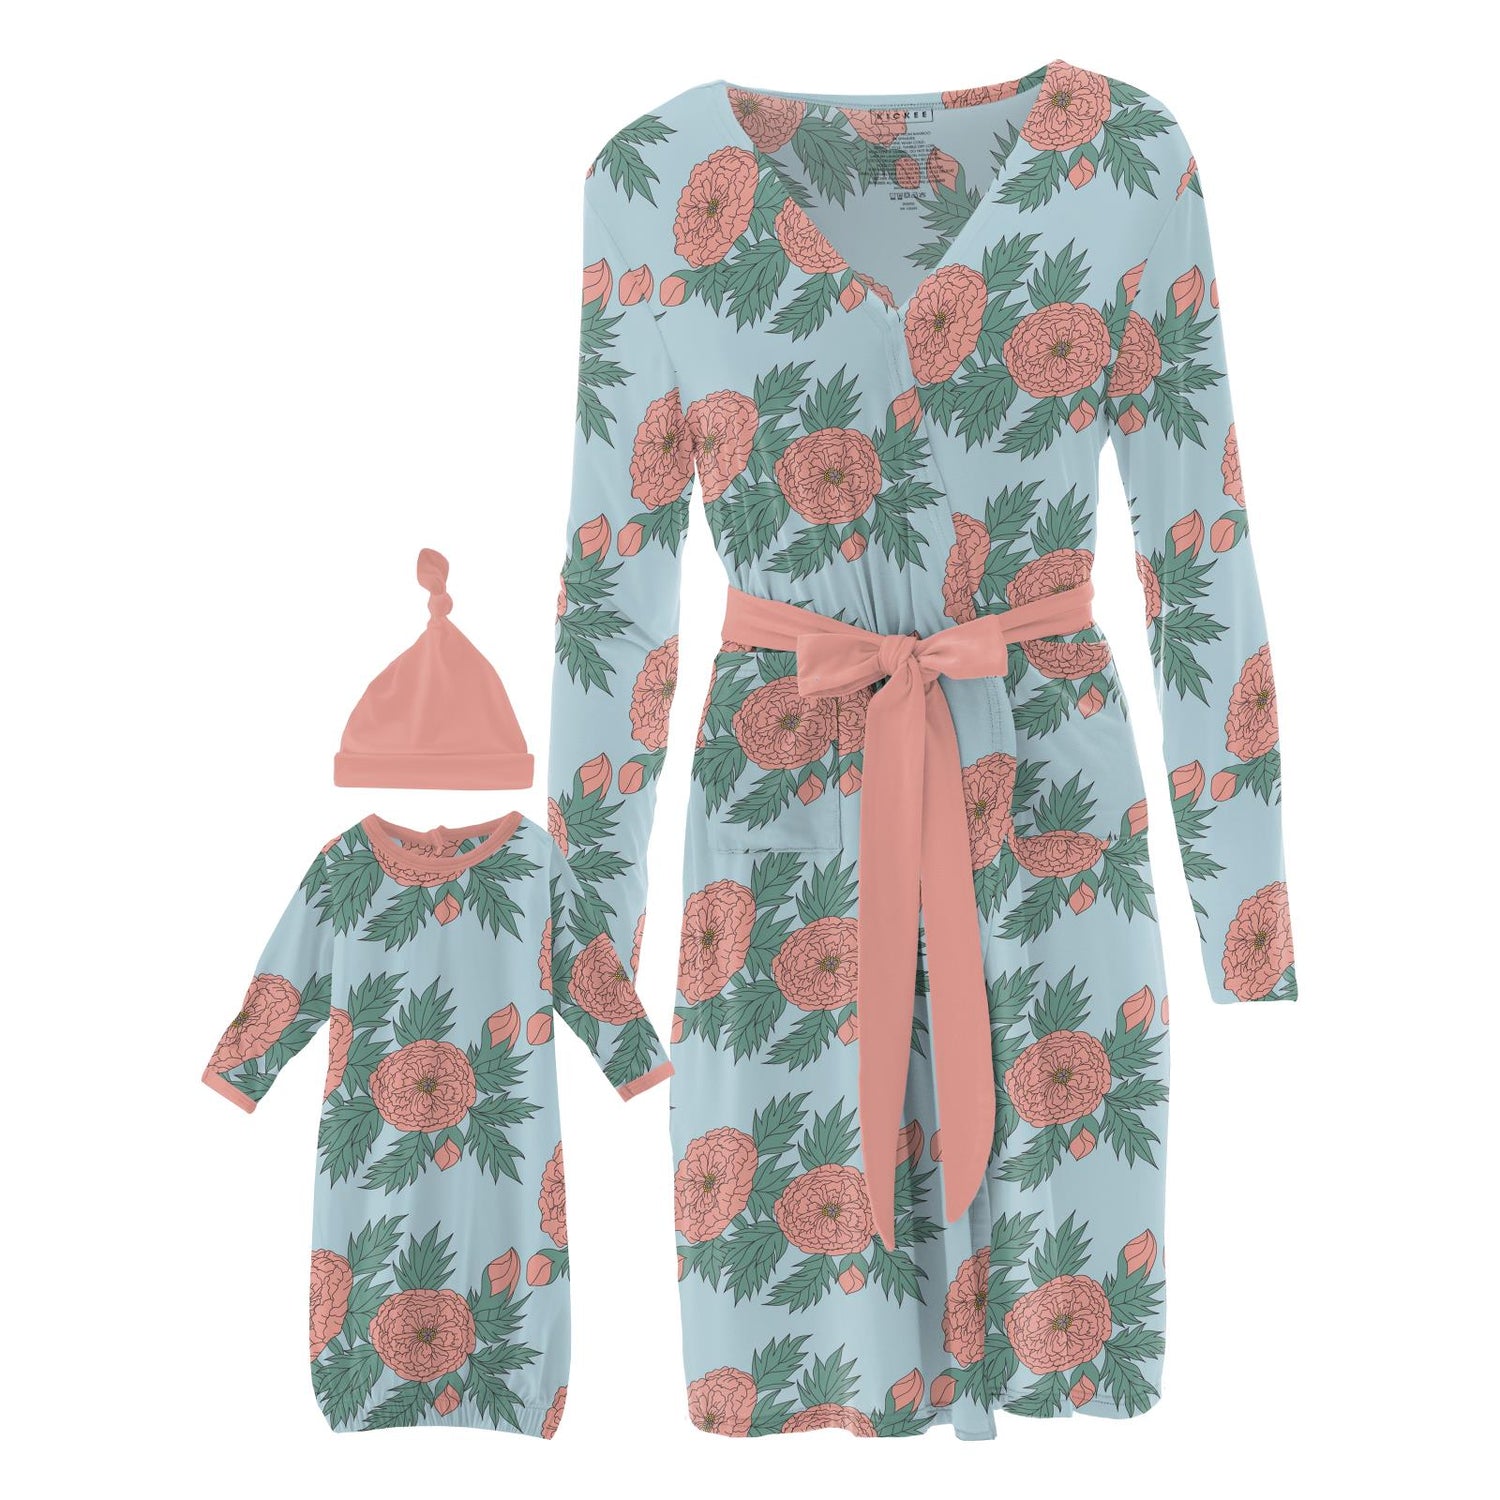 Women's Mid Length Lounge Robe & Layette Gown Set in Spring Sky Floral